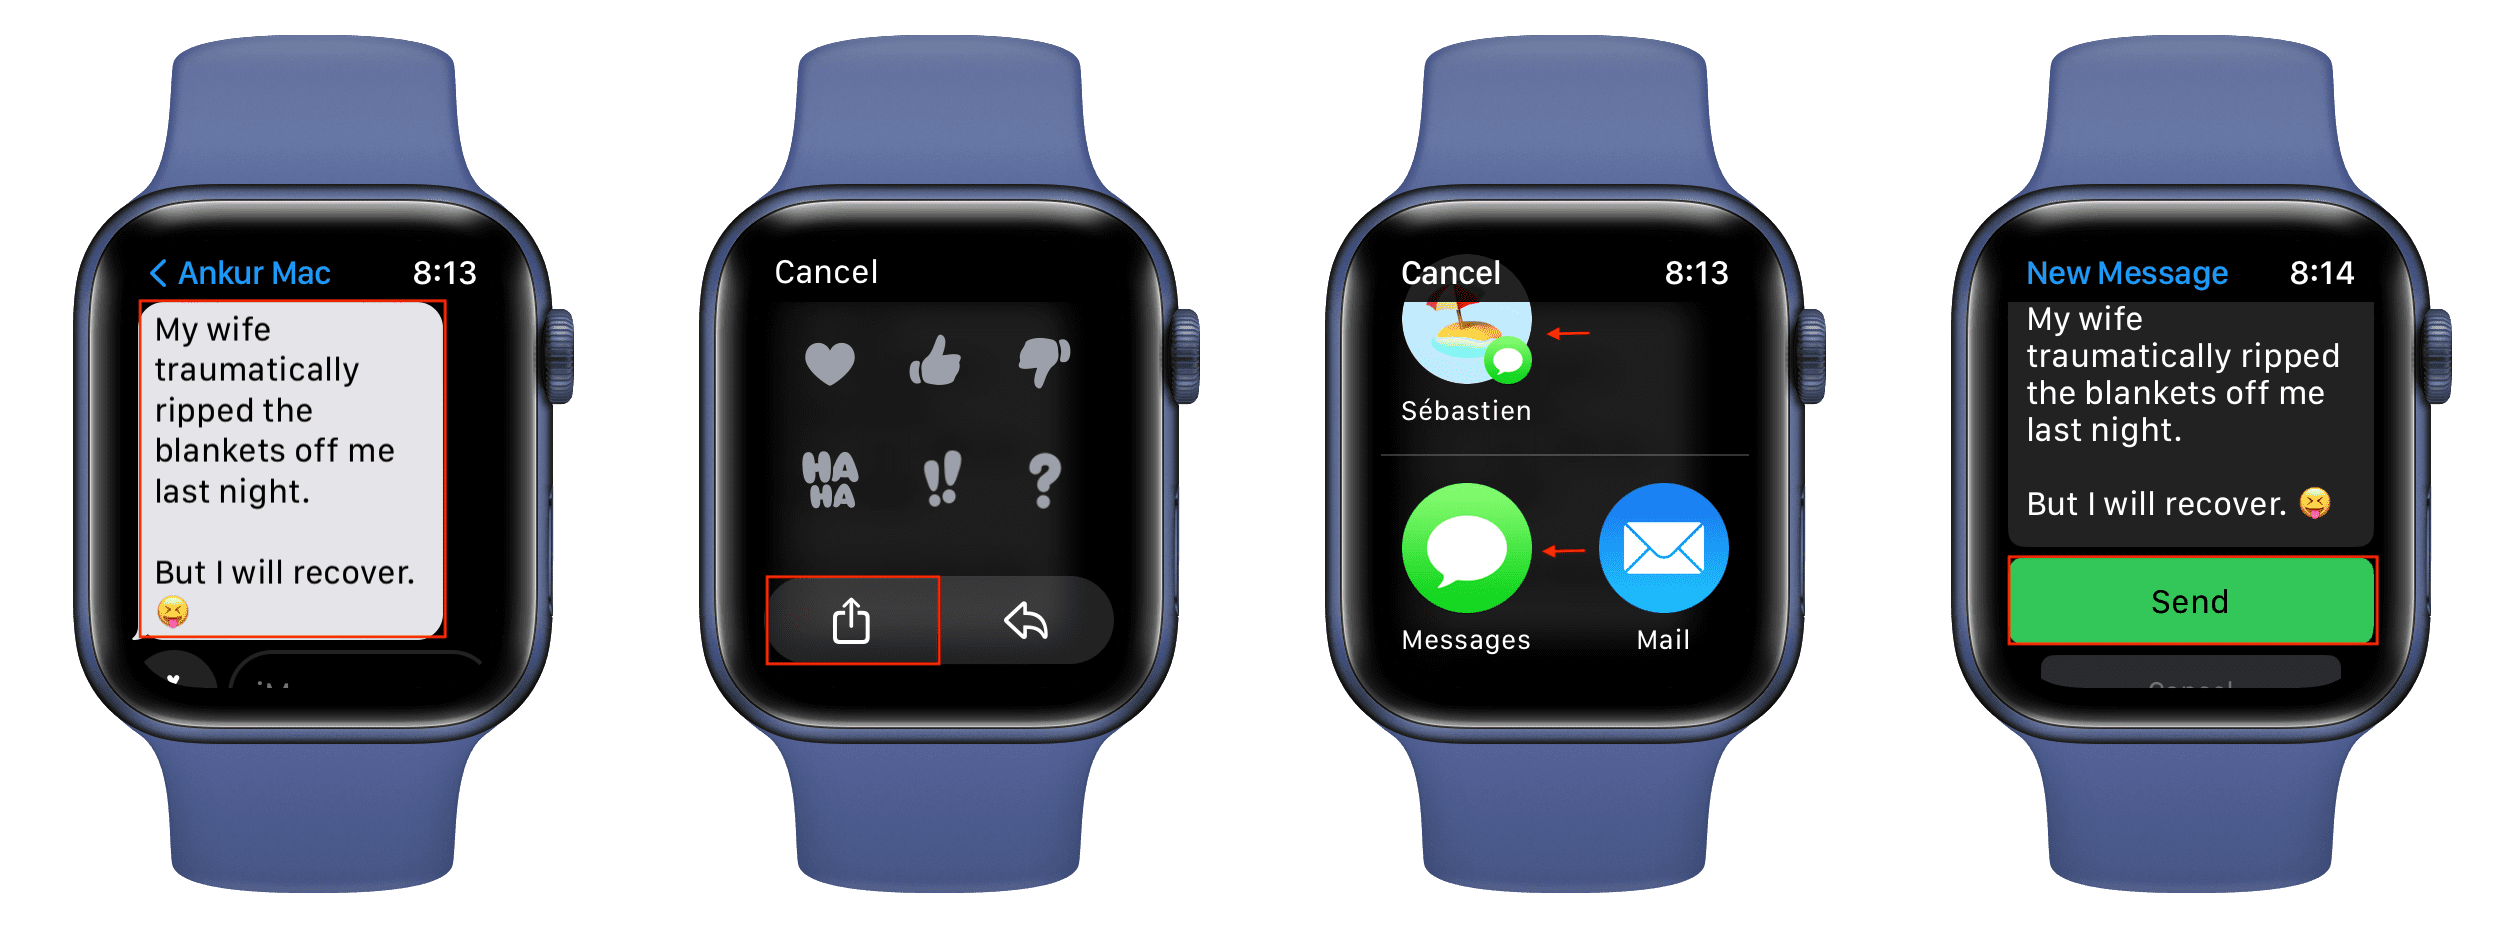 Forward messages on Apple Watch